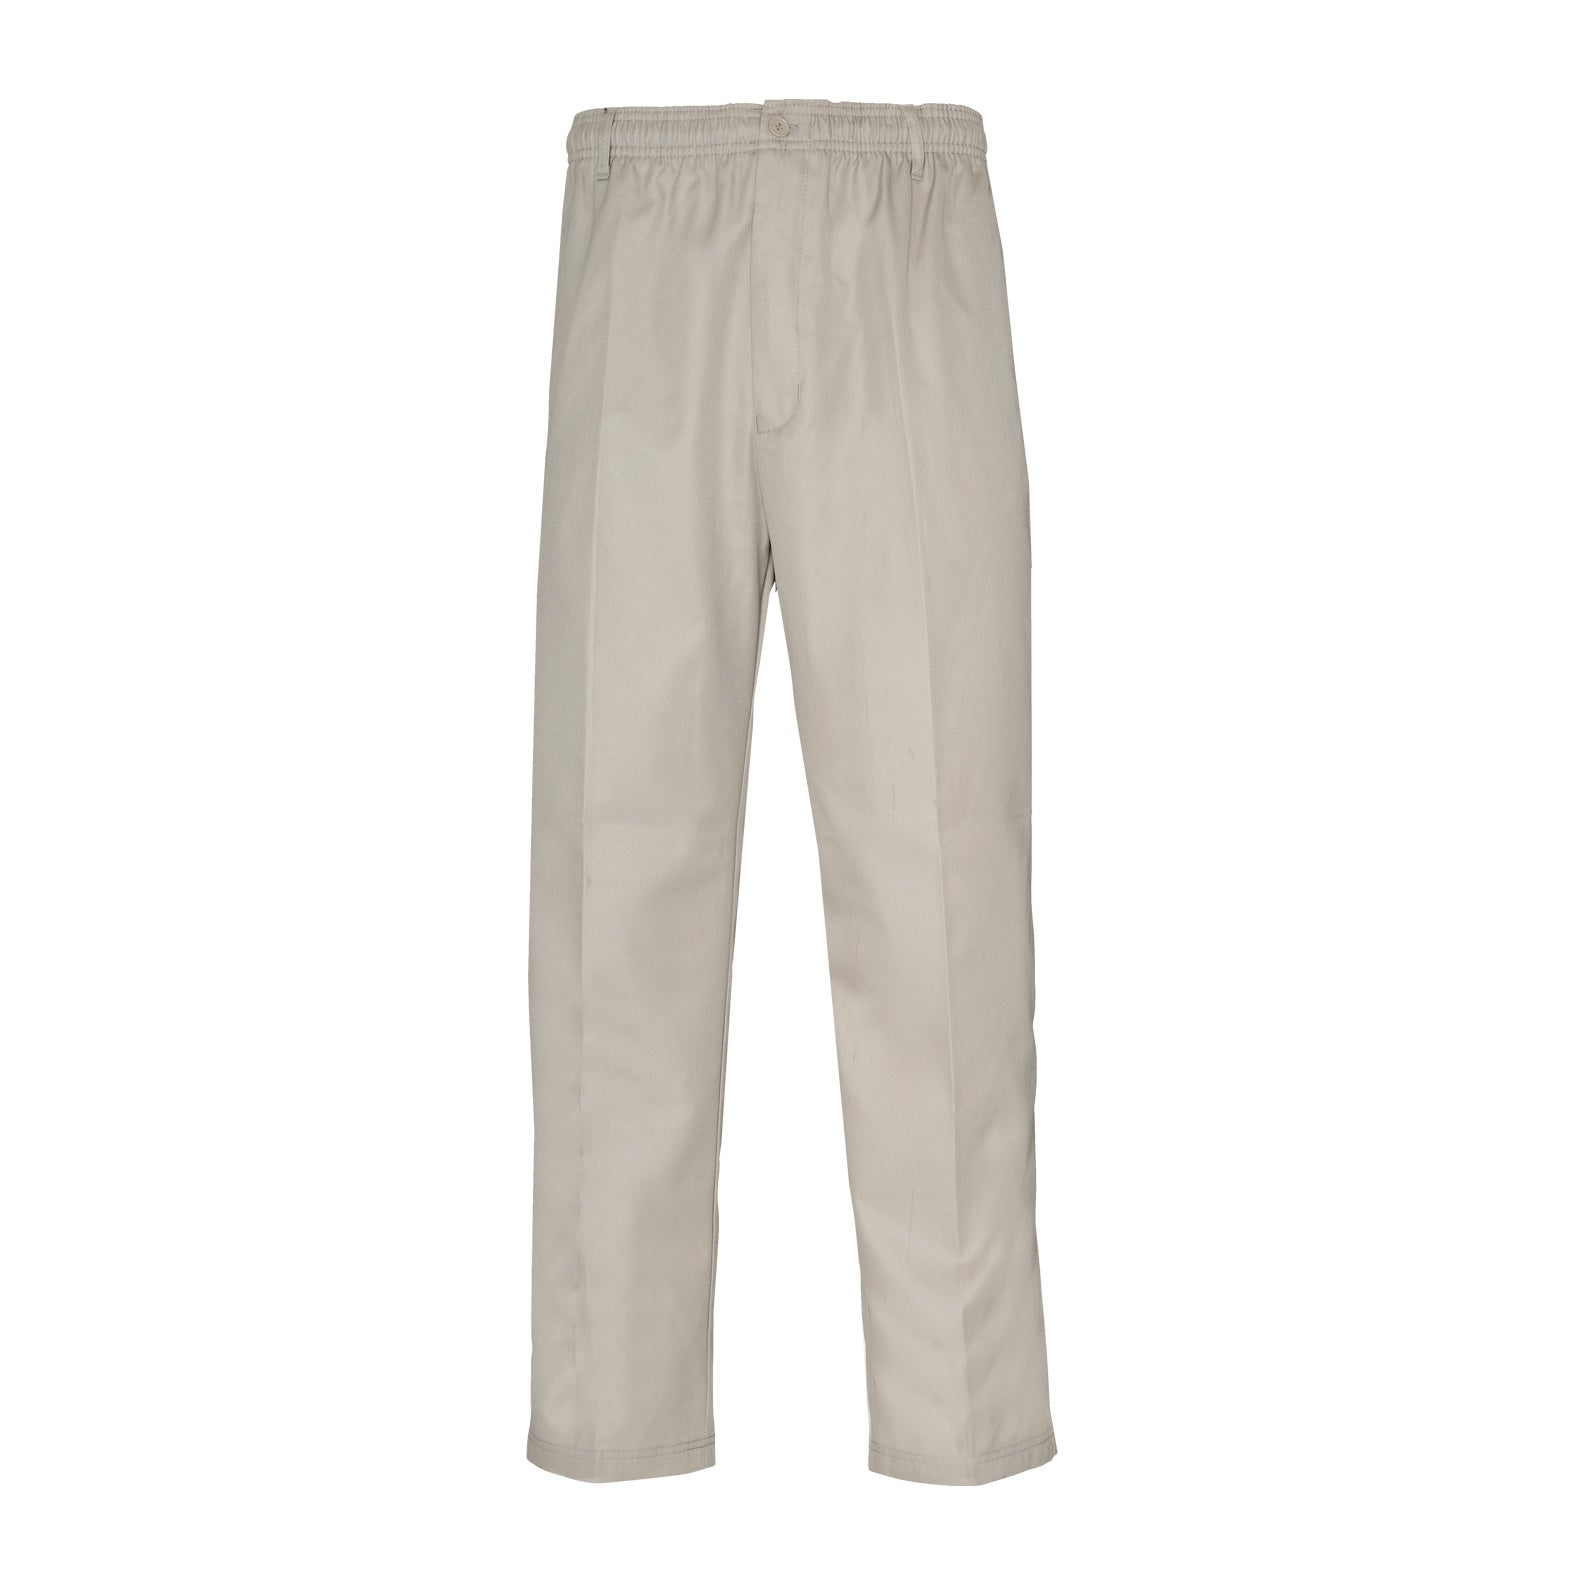 Unisex Superstorm Waterproof Trousers Taylor | Taylor Bowls Taylor